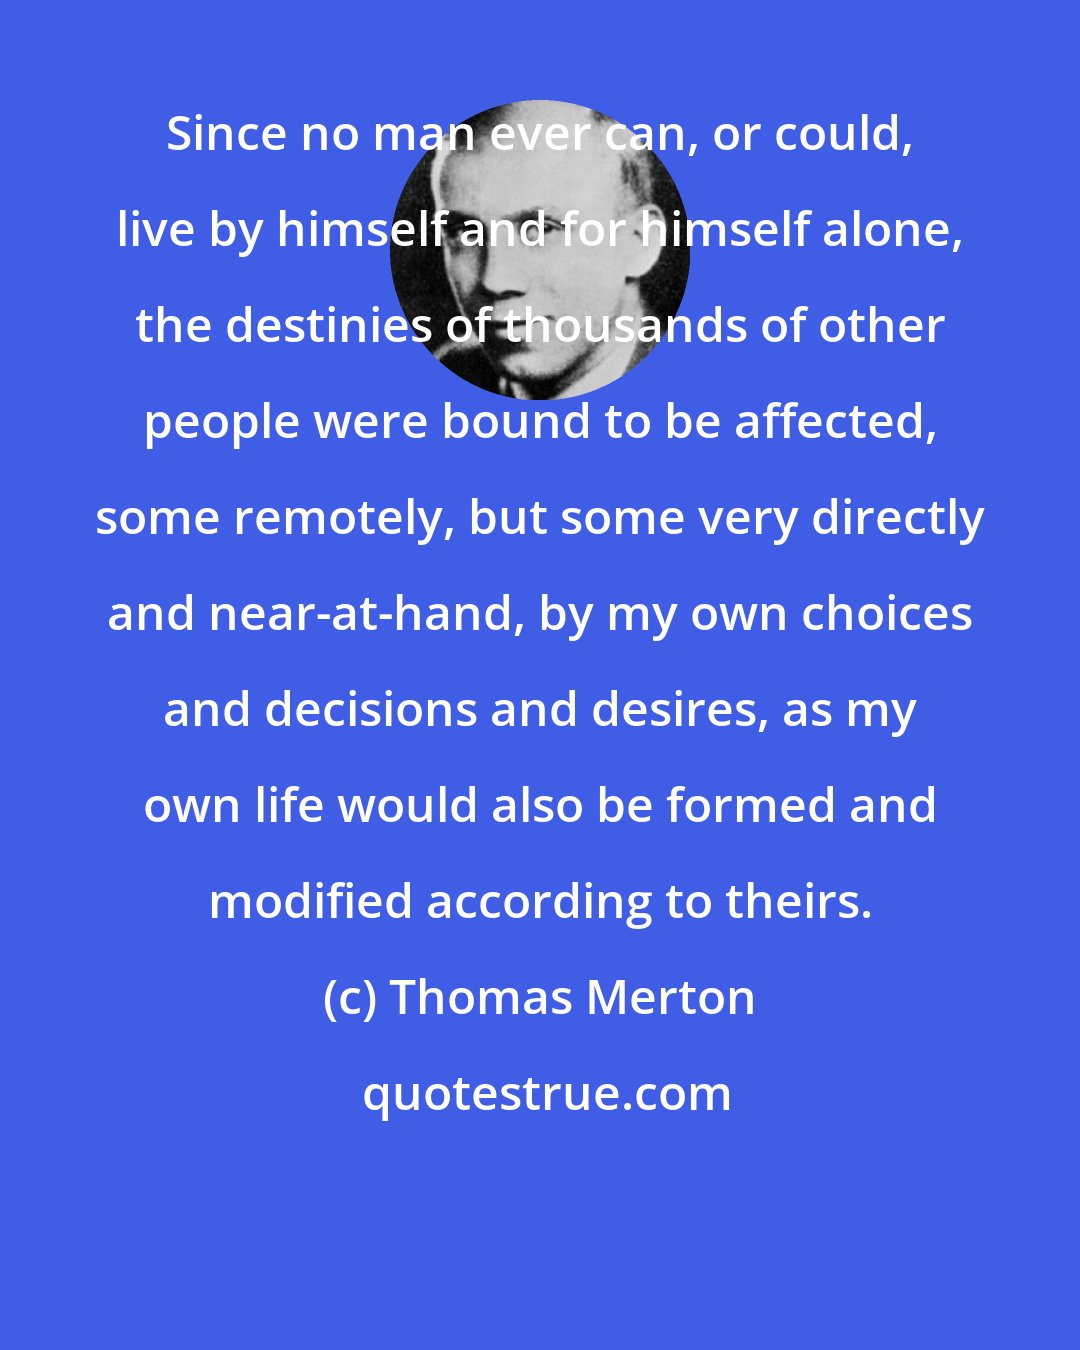 Thomas Merton: Since no man ever can, or could, live by himself and for himself alone, the destinies of thousands of other people were bound to be affected, some remotely, but some very directly and near-at-hand, by my own choices and decisions and desires, as my own life would also be formed and modified according to theirs.